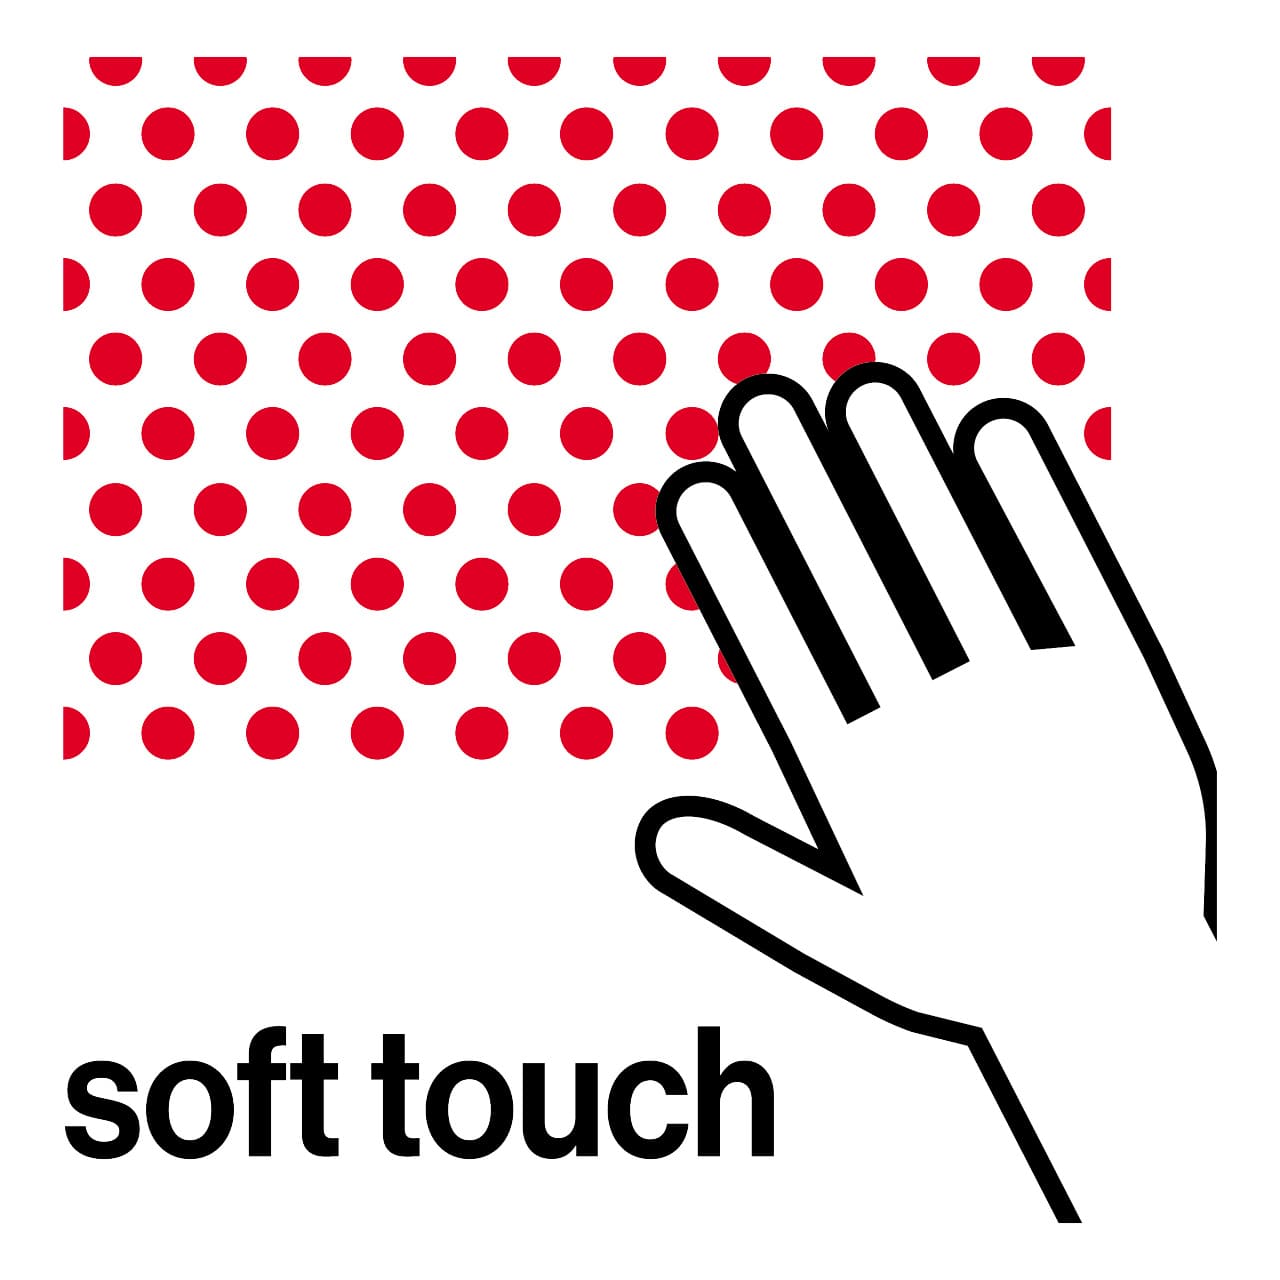 PICTO SOFT TOUCH POSITIVE